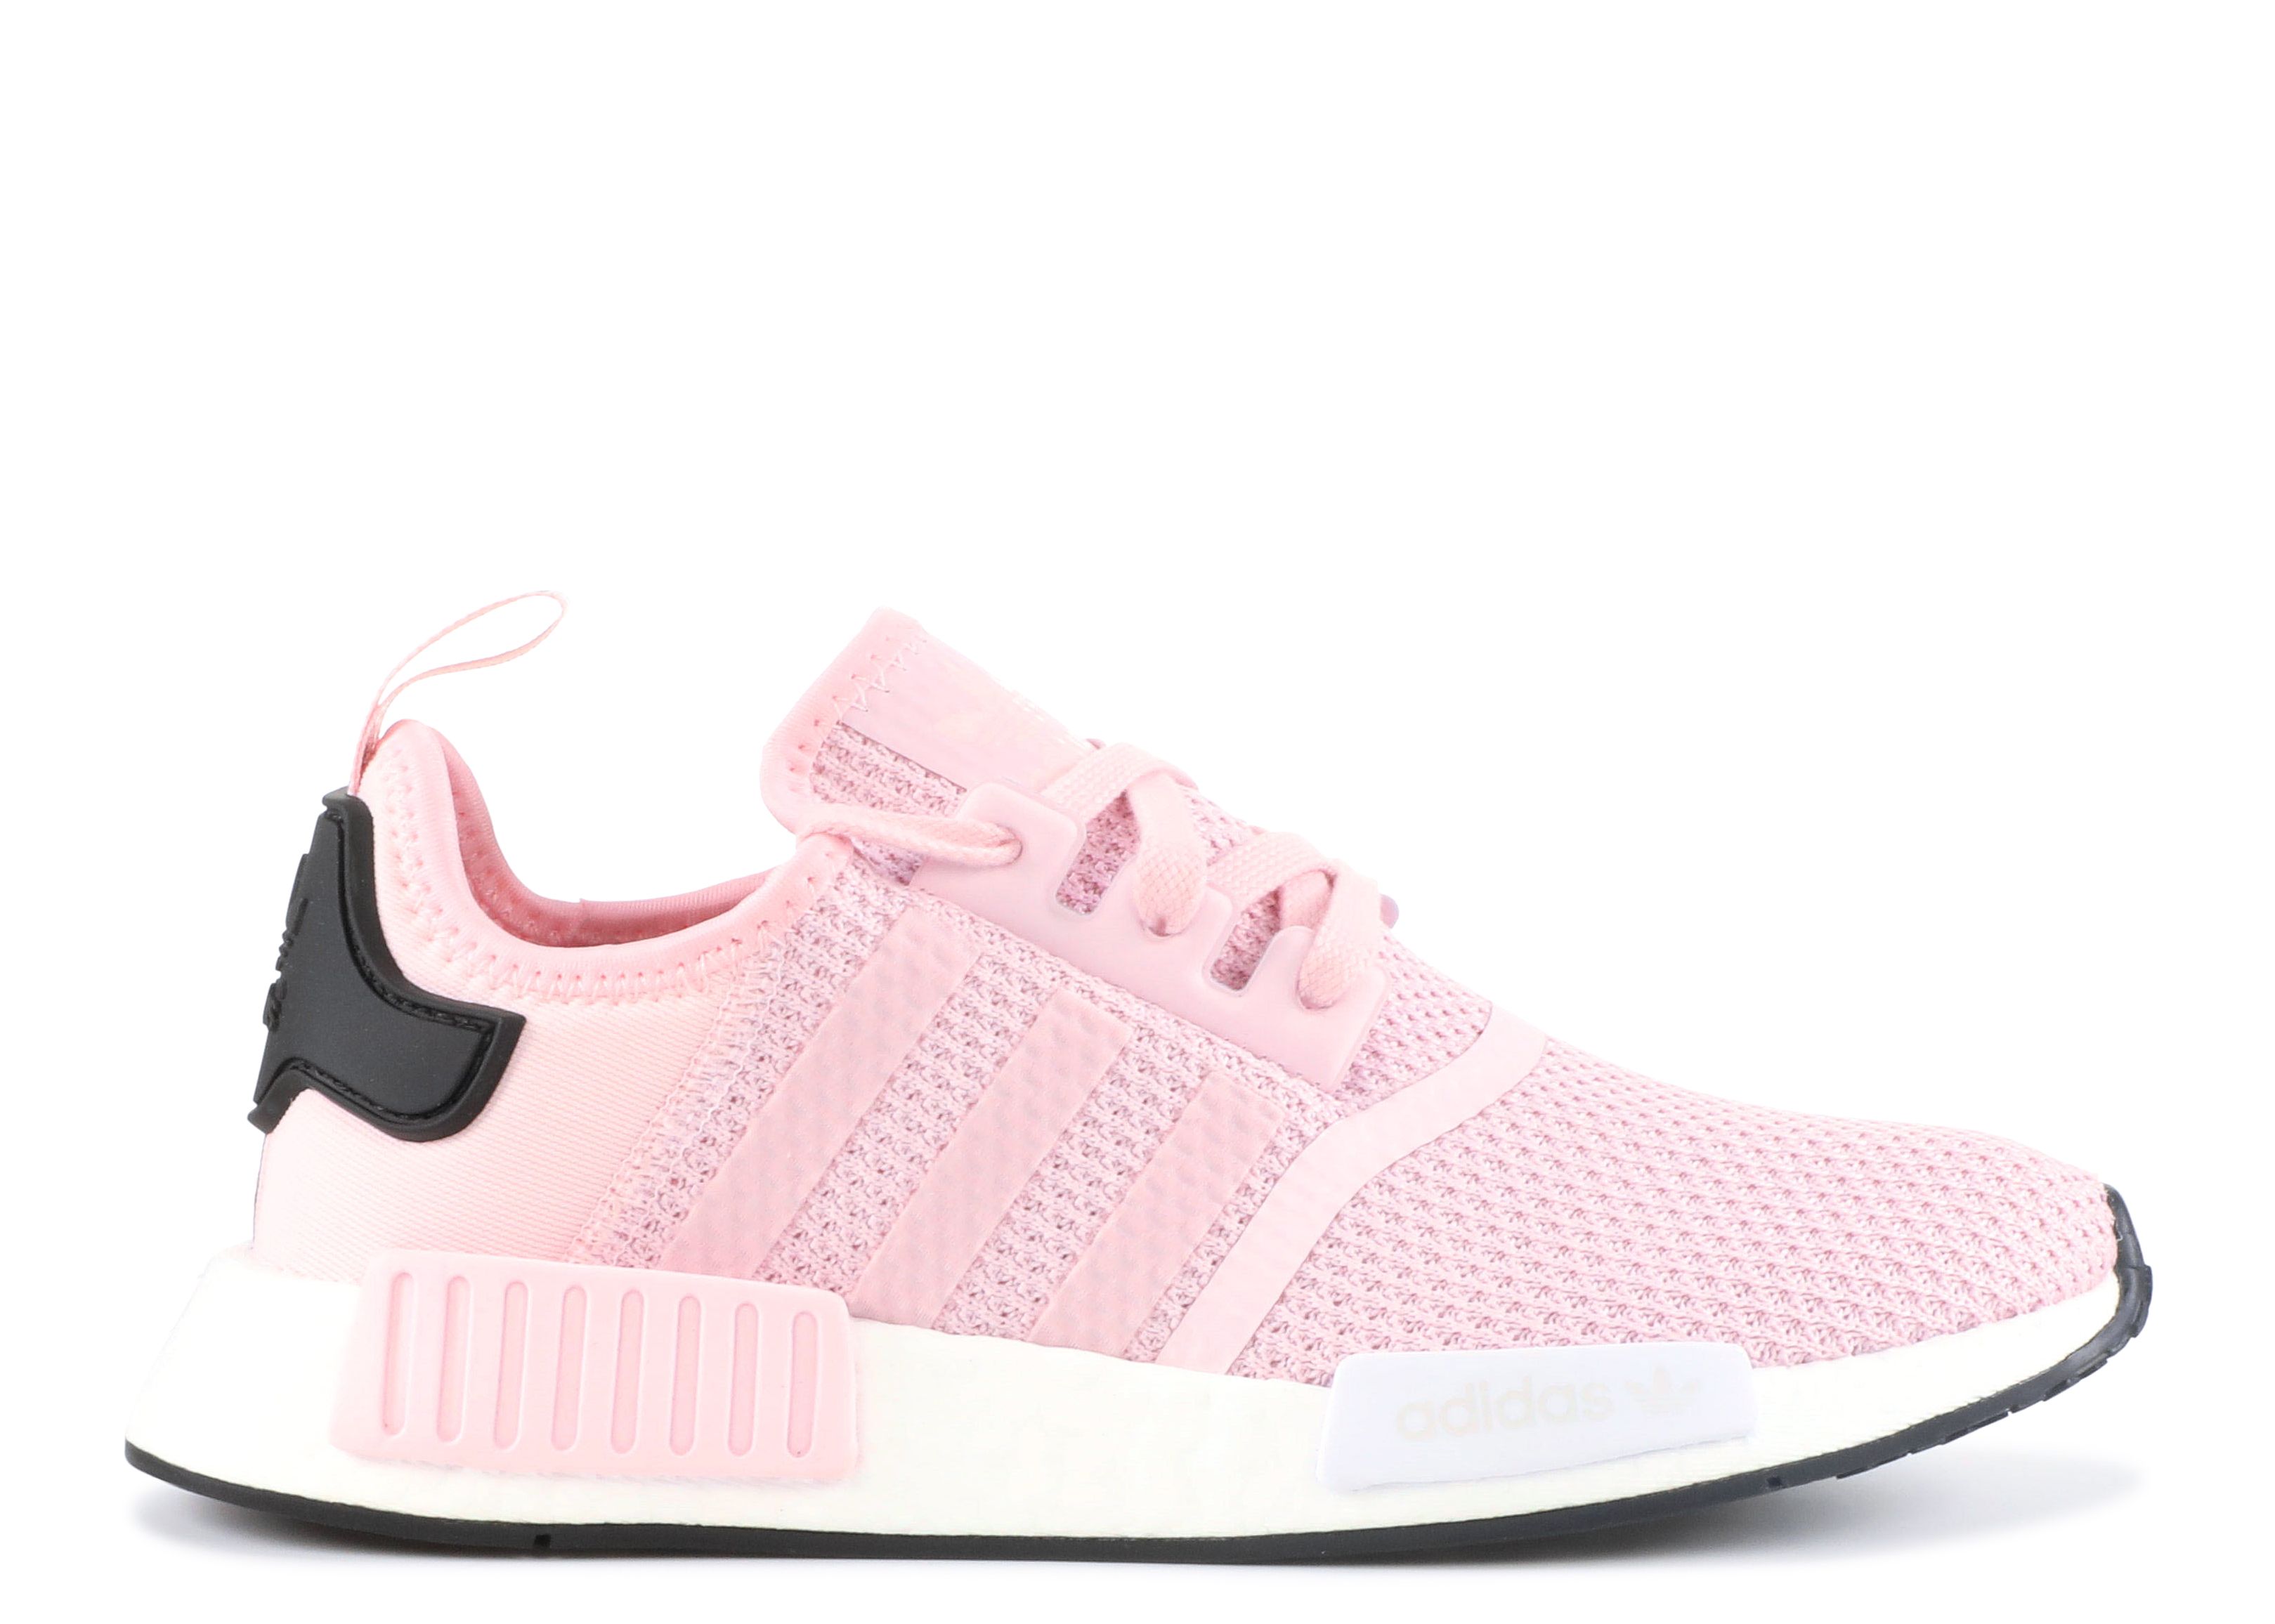 nmd clear pink